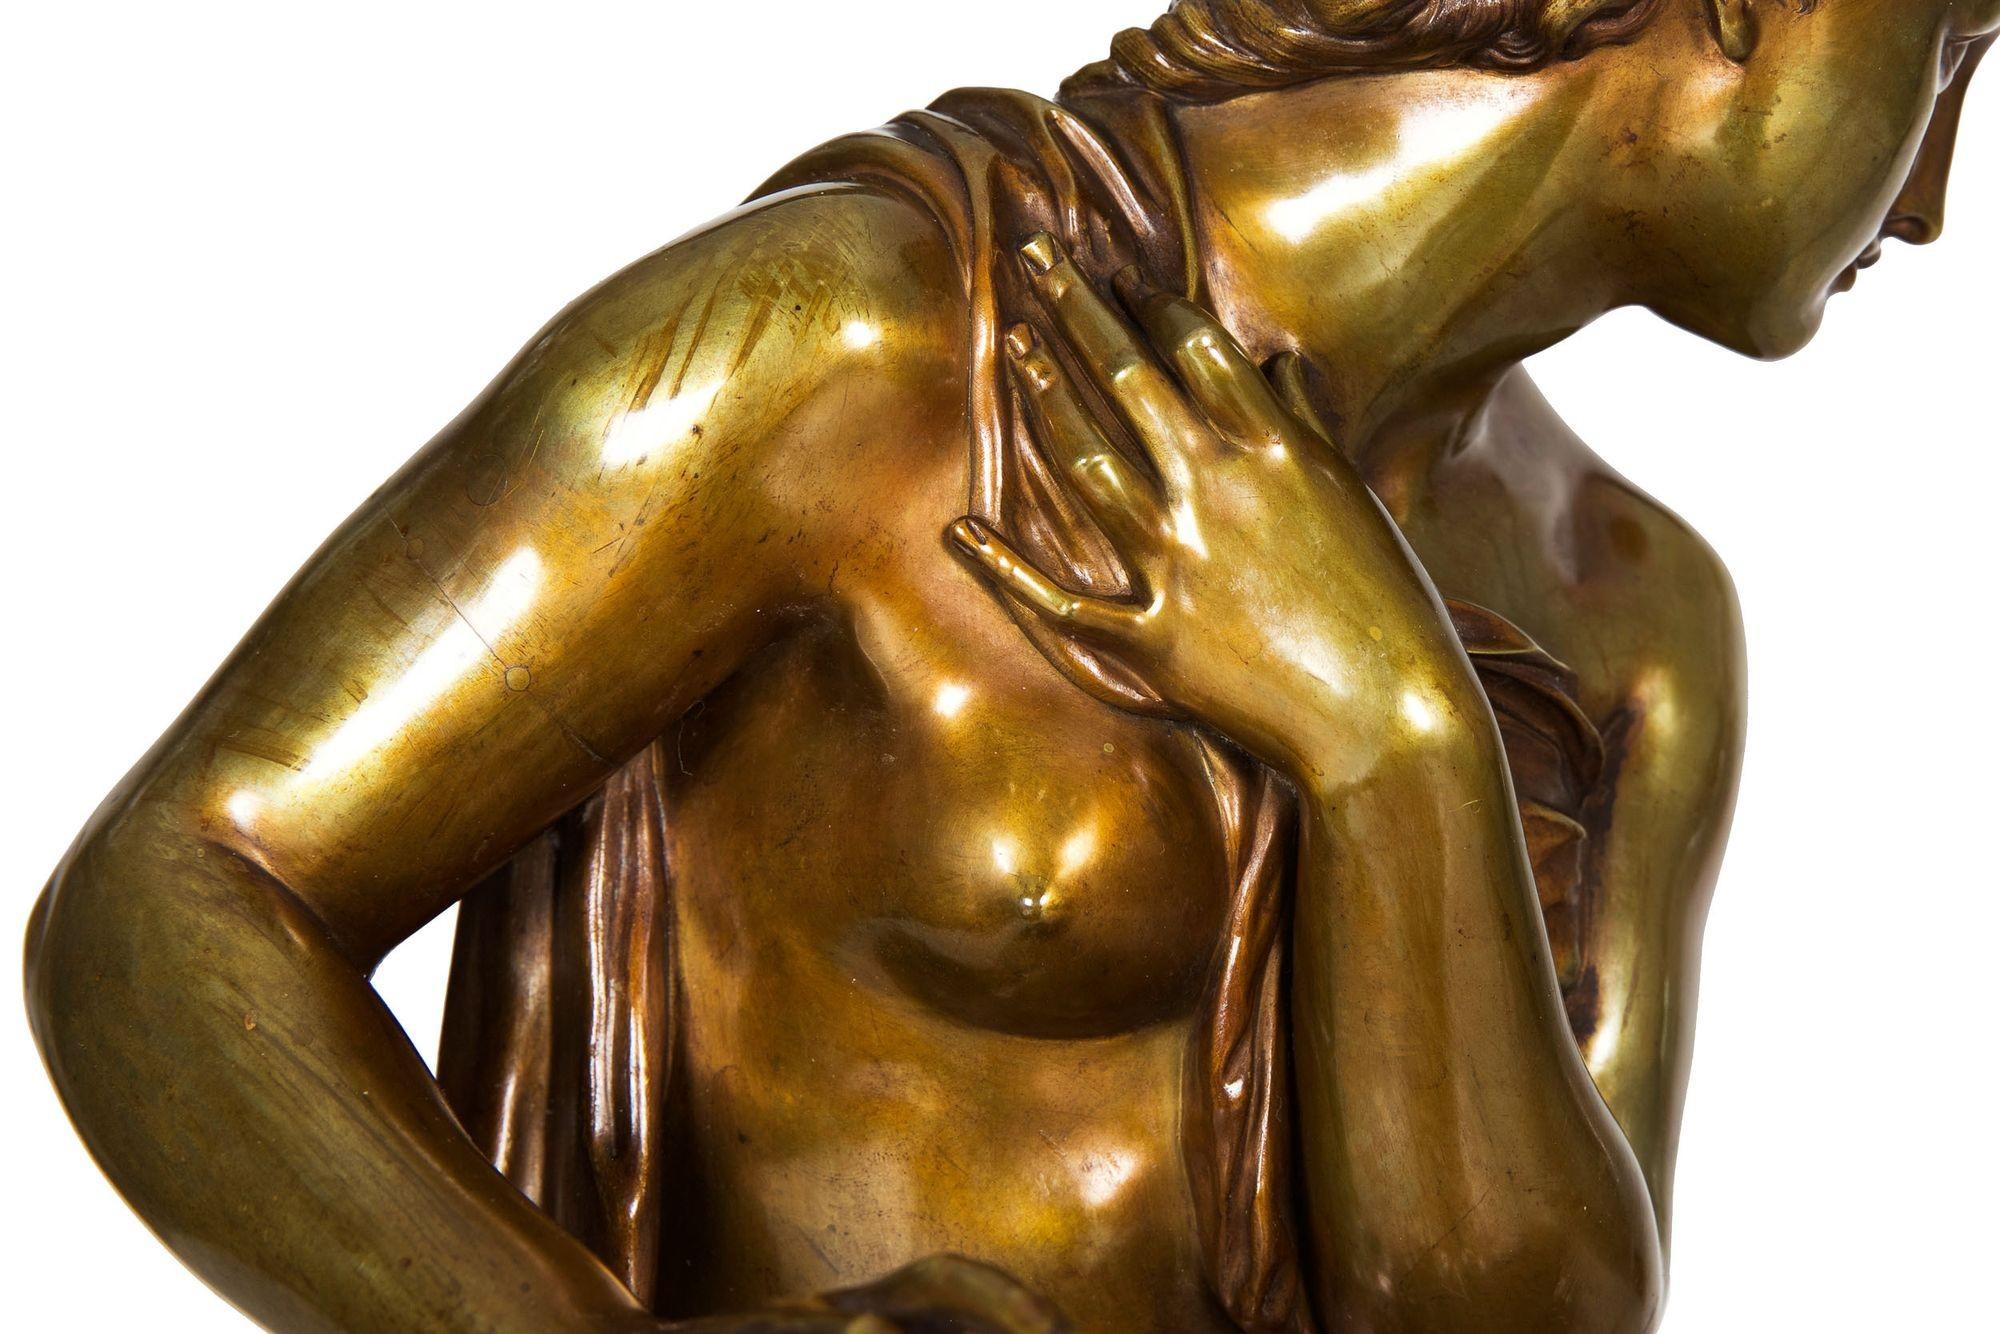 French Antique Bronze Sculpture “Seated Woman” by Etienne-Henri Dumaige, c.1880 For Sale 8